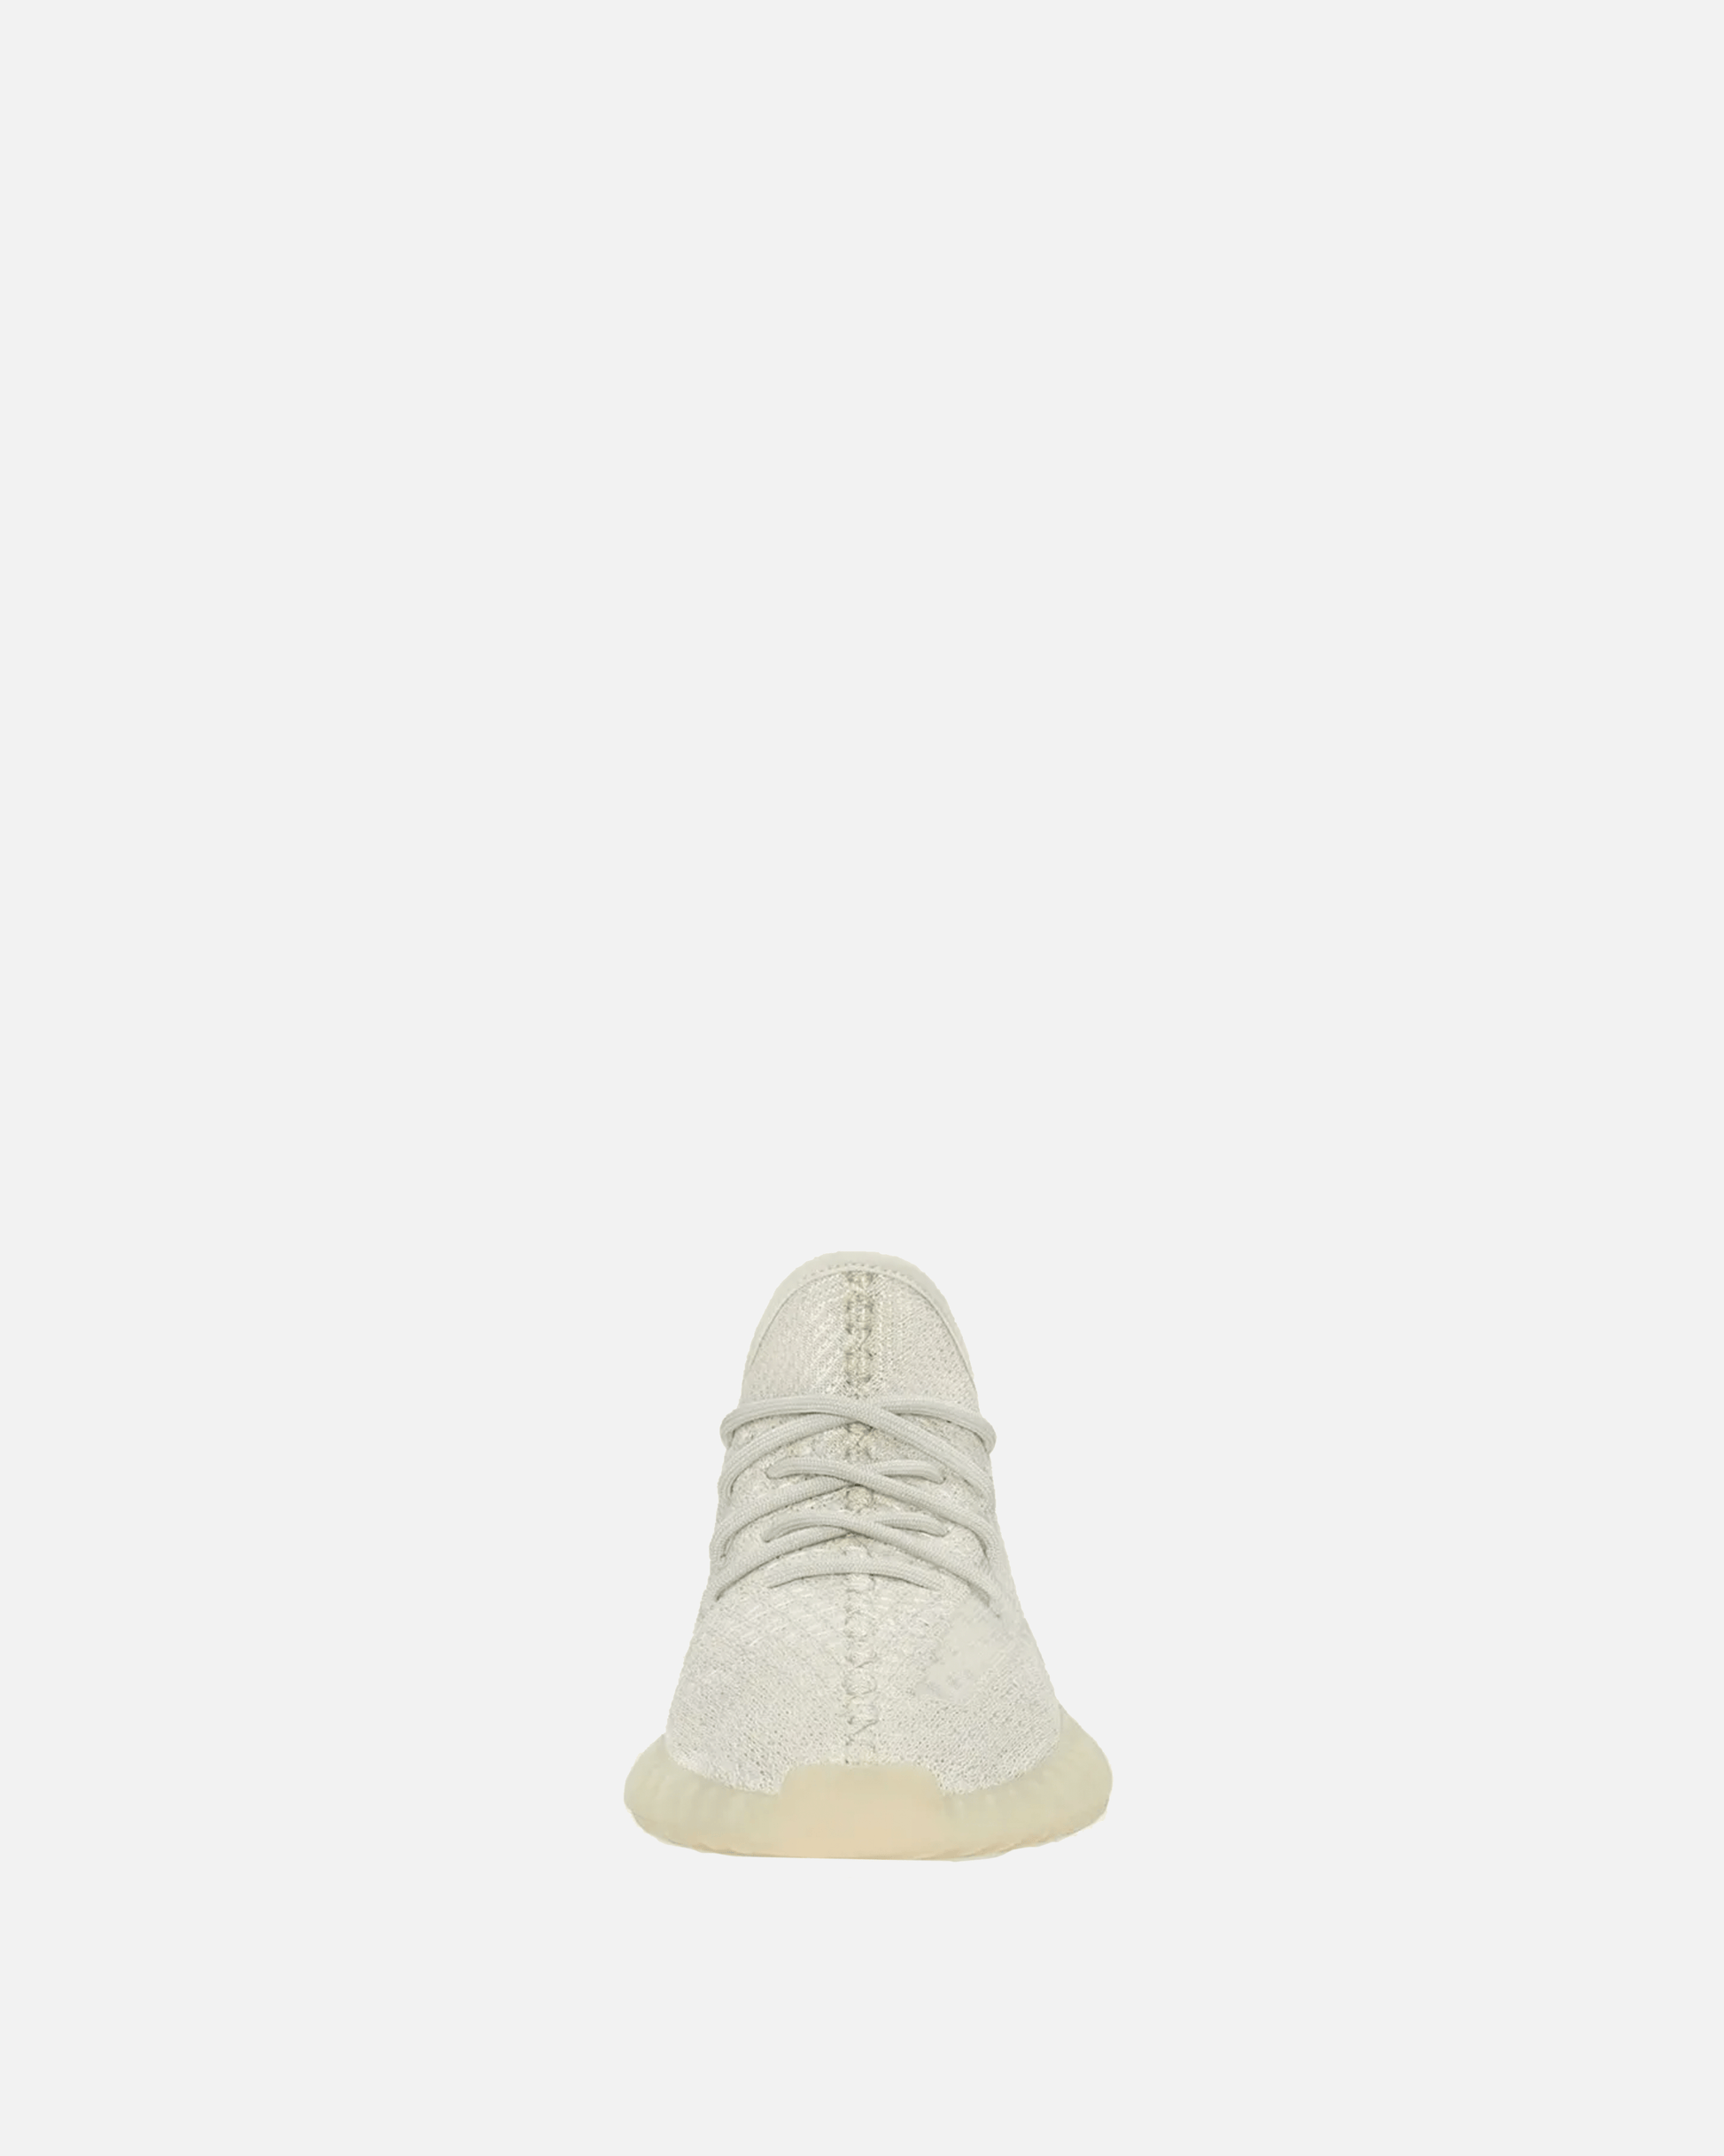 Adidas Releases Yeezy Boost 350 V2 'Light'